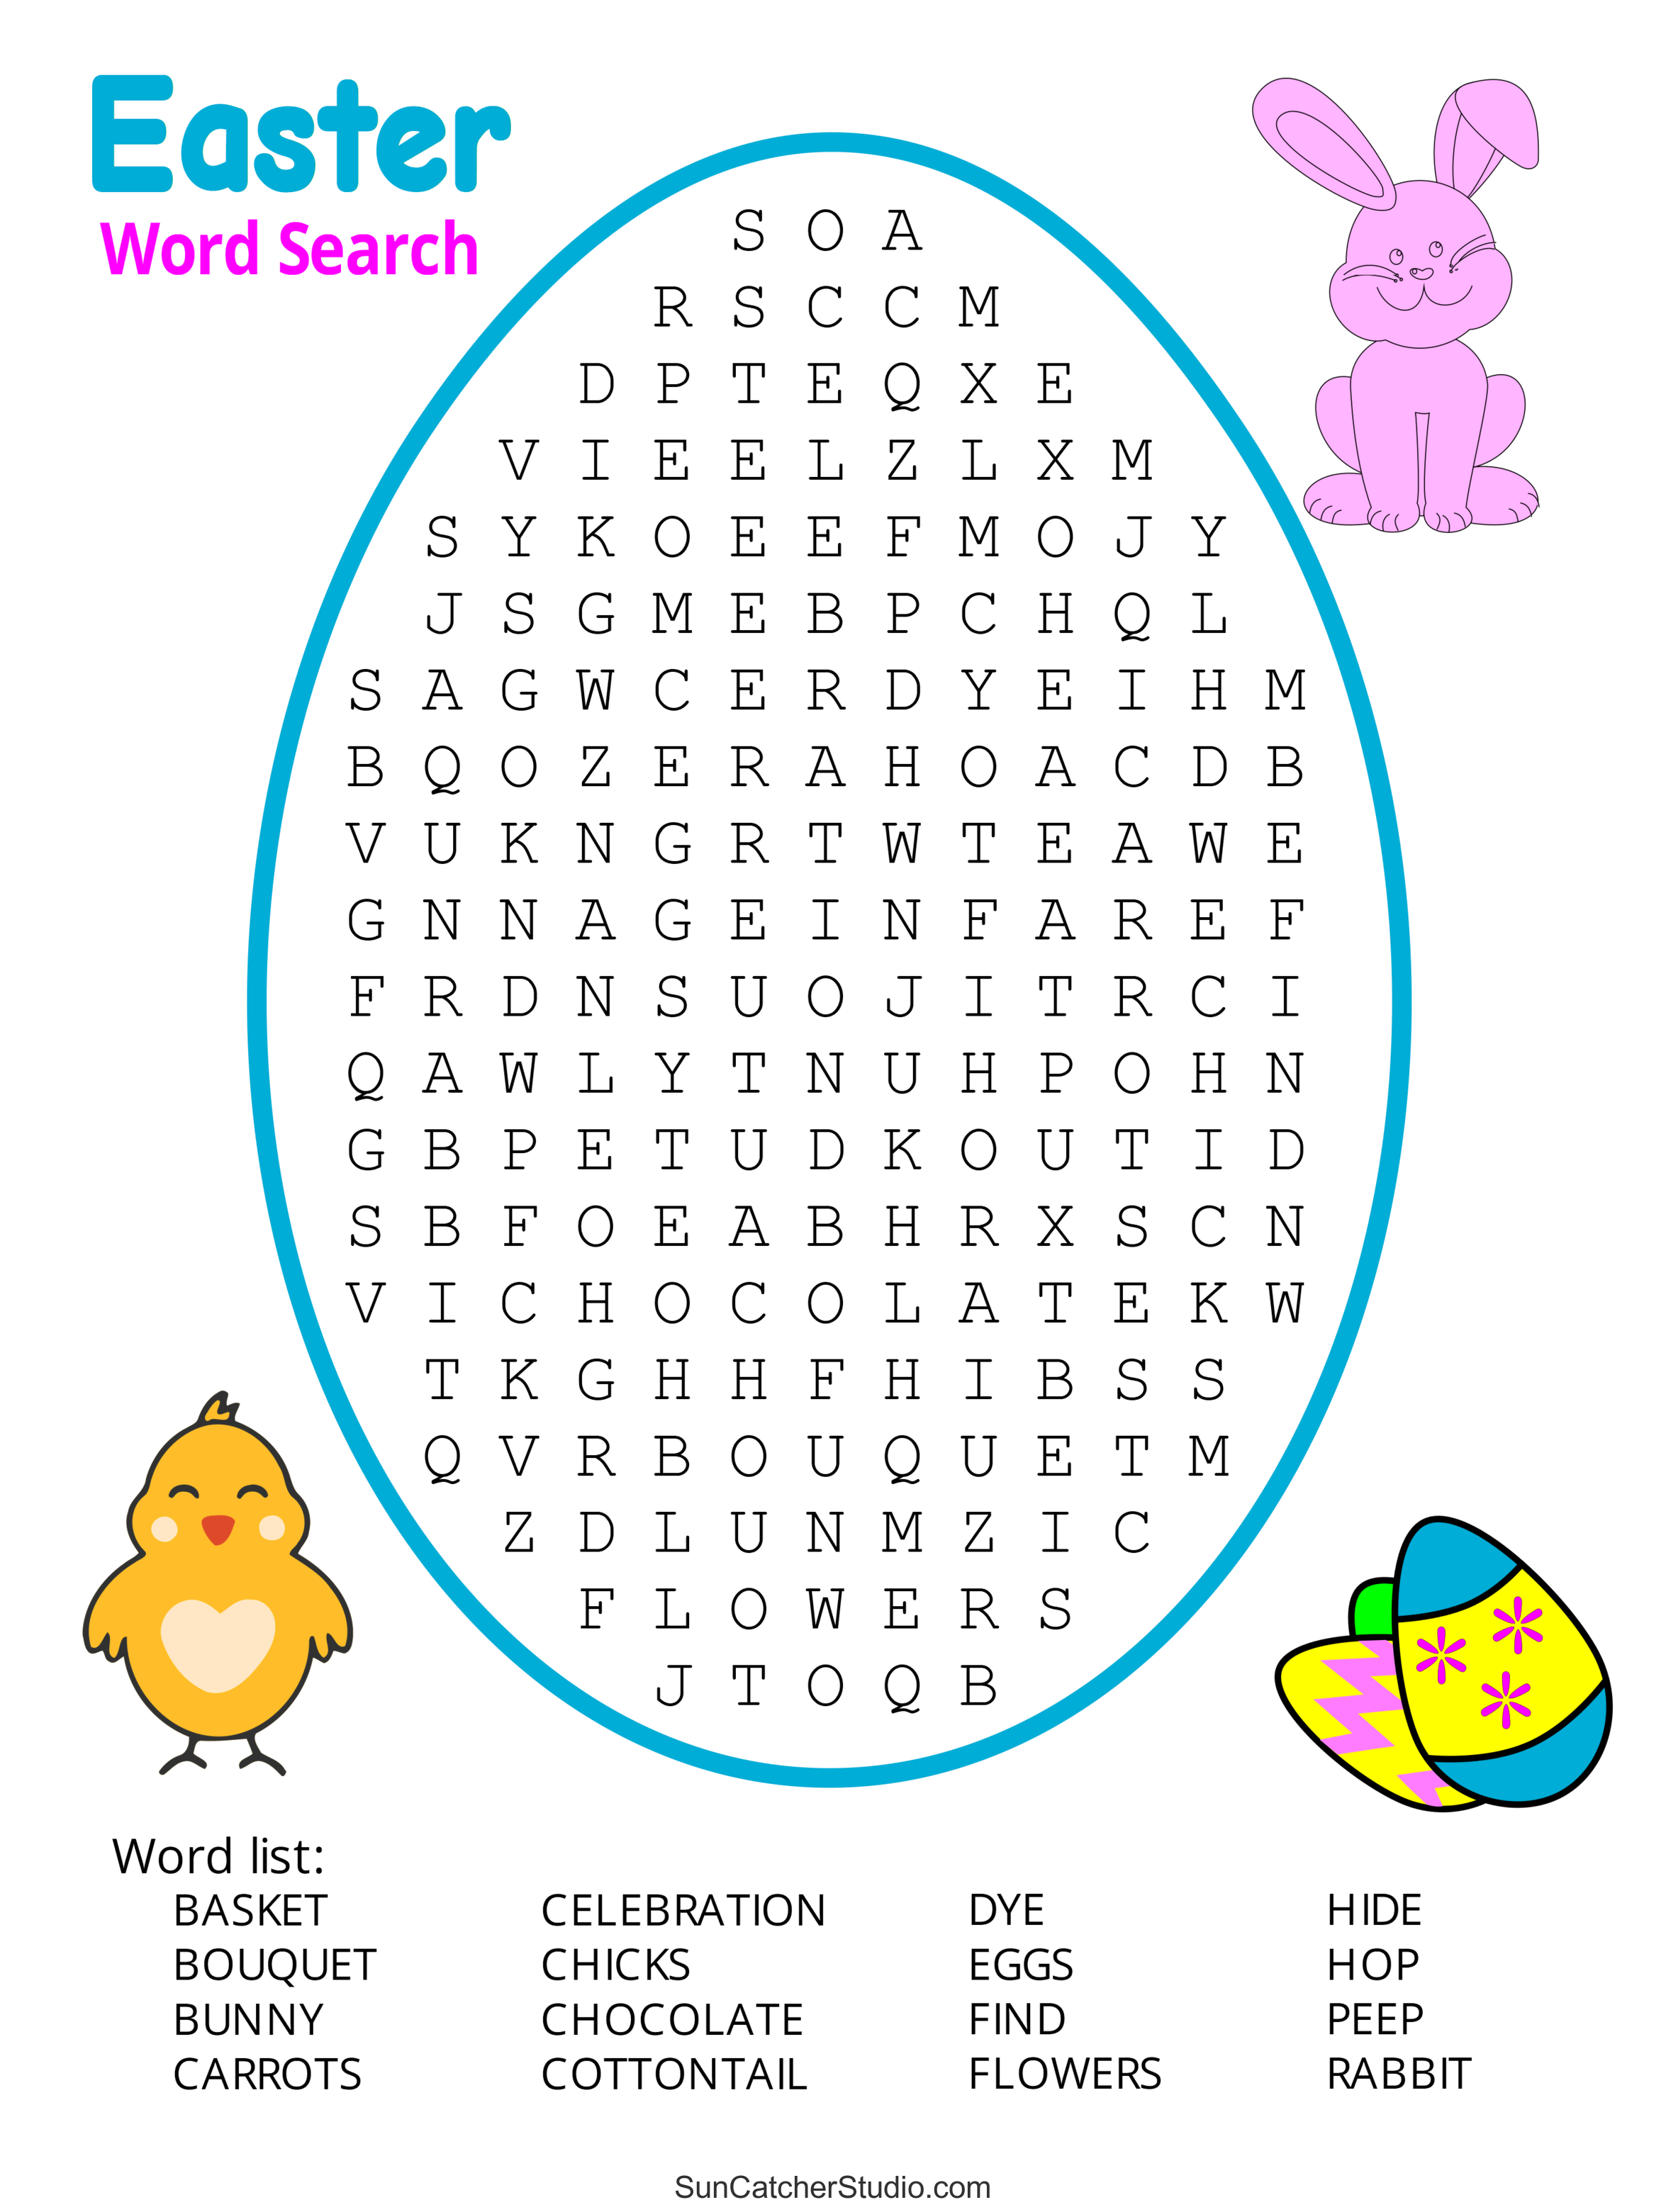 easter-word-search-free-printable-pdf-puzzles-diy-projects-patterns-monograms-designs